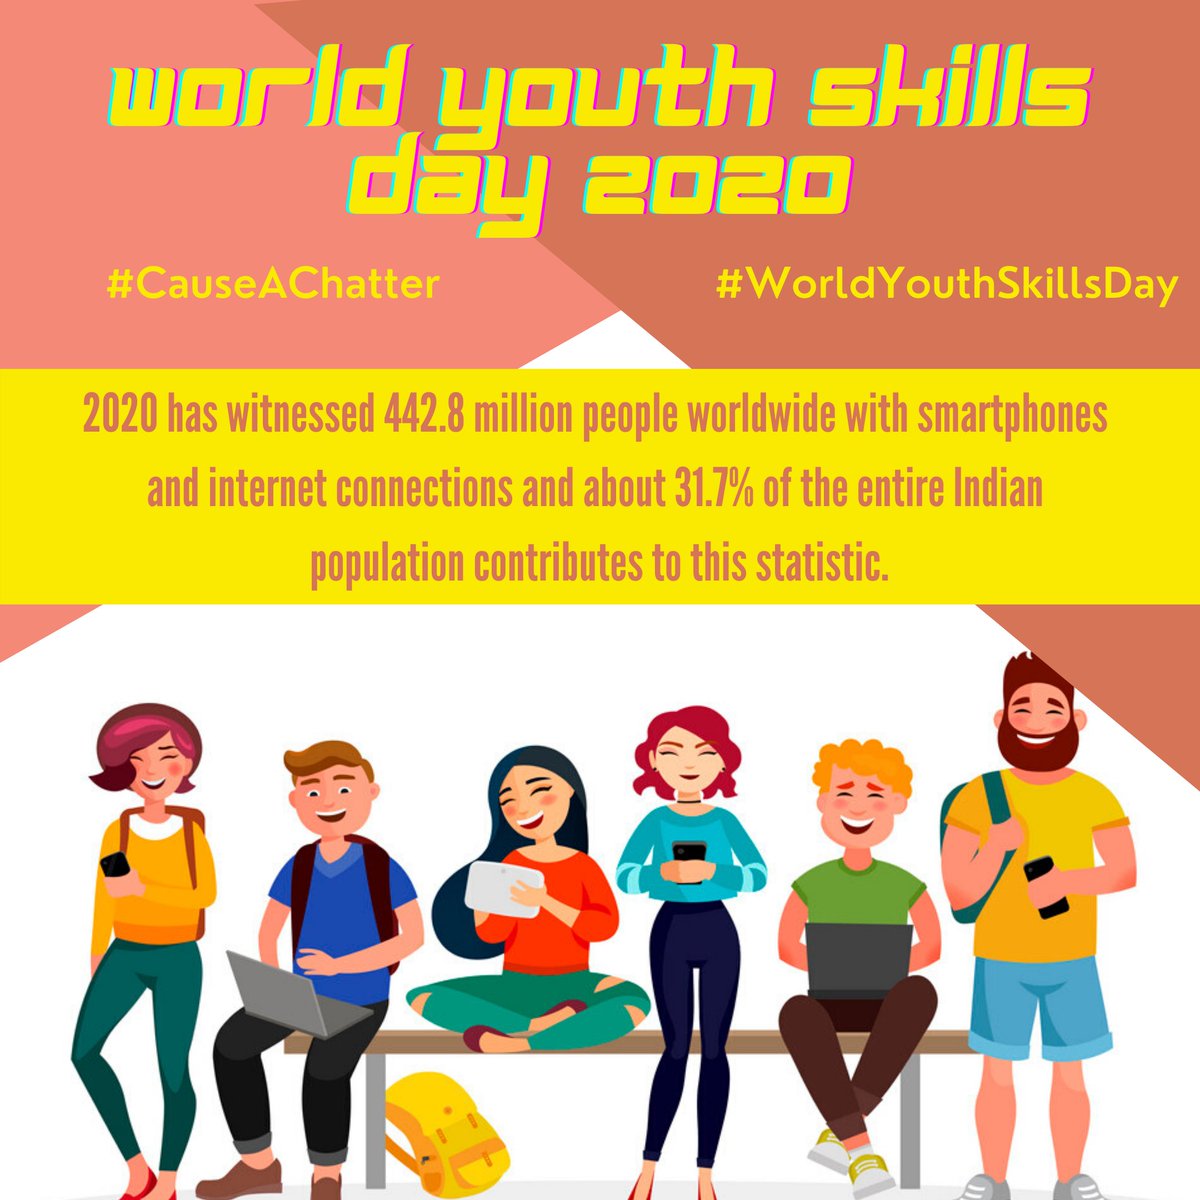 In recent times, internet has emerged as a democratic platform for users from all walks of life. Anyone with a thought and talent can find their niche on the various apps that are accessible and easy to use. All that's required is creativity!  #WorldYouthSkillsDay  #CauseAChatter